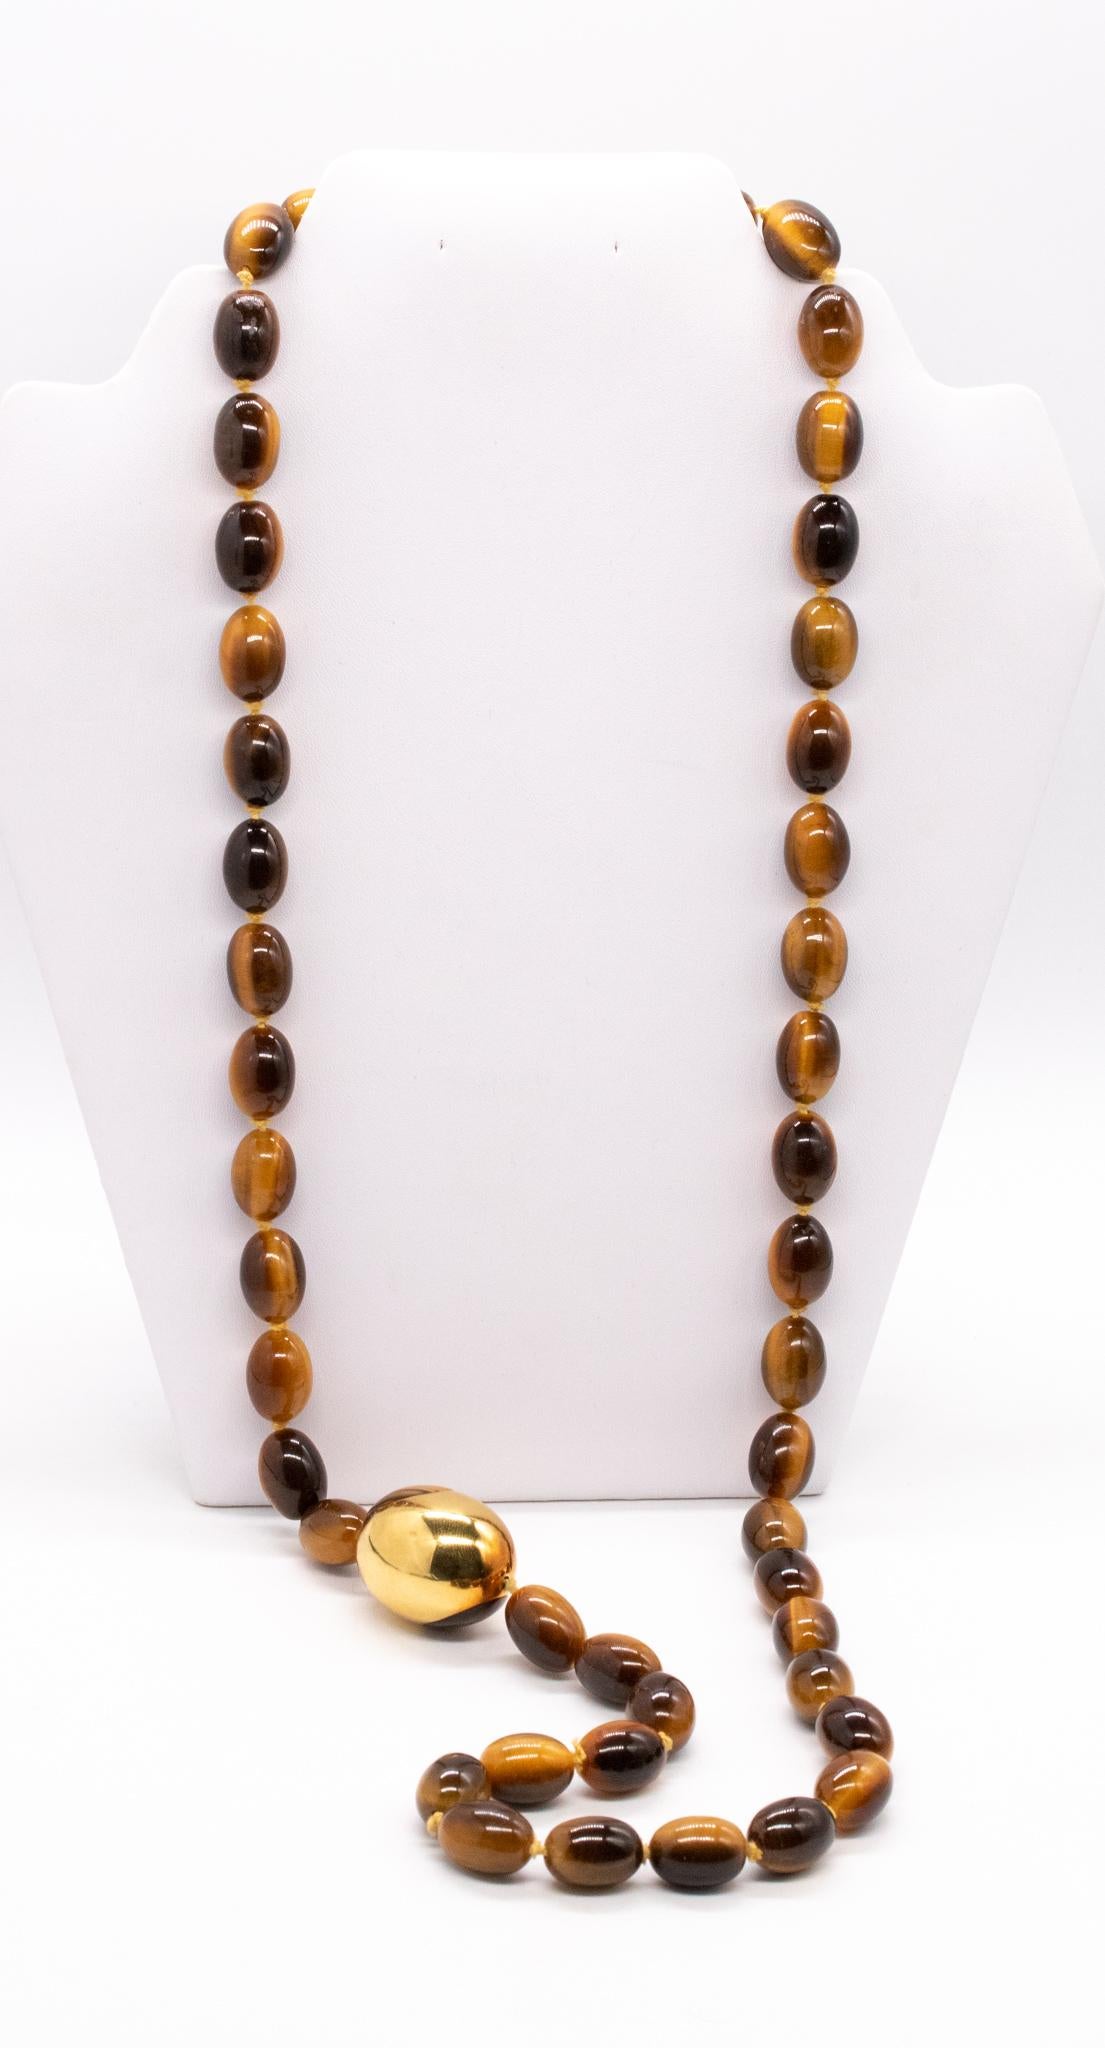 Modernist Tiffany Co 1977 Angela Cummings Sautoir Necklace 18Kt Yellow Gold And Tiger Eye For Sale